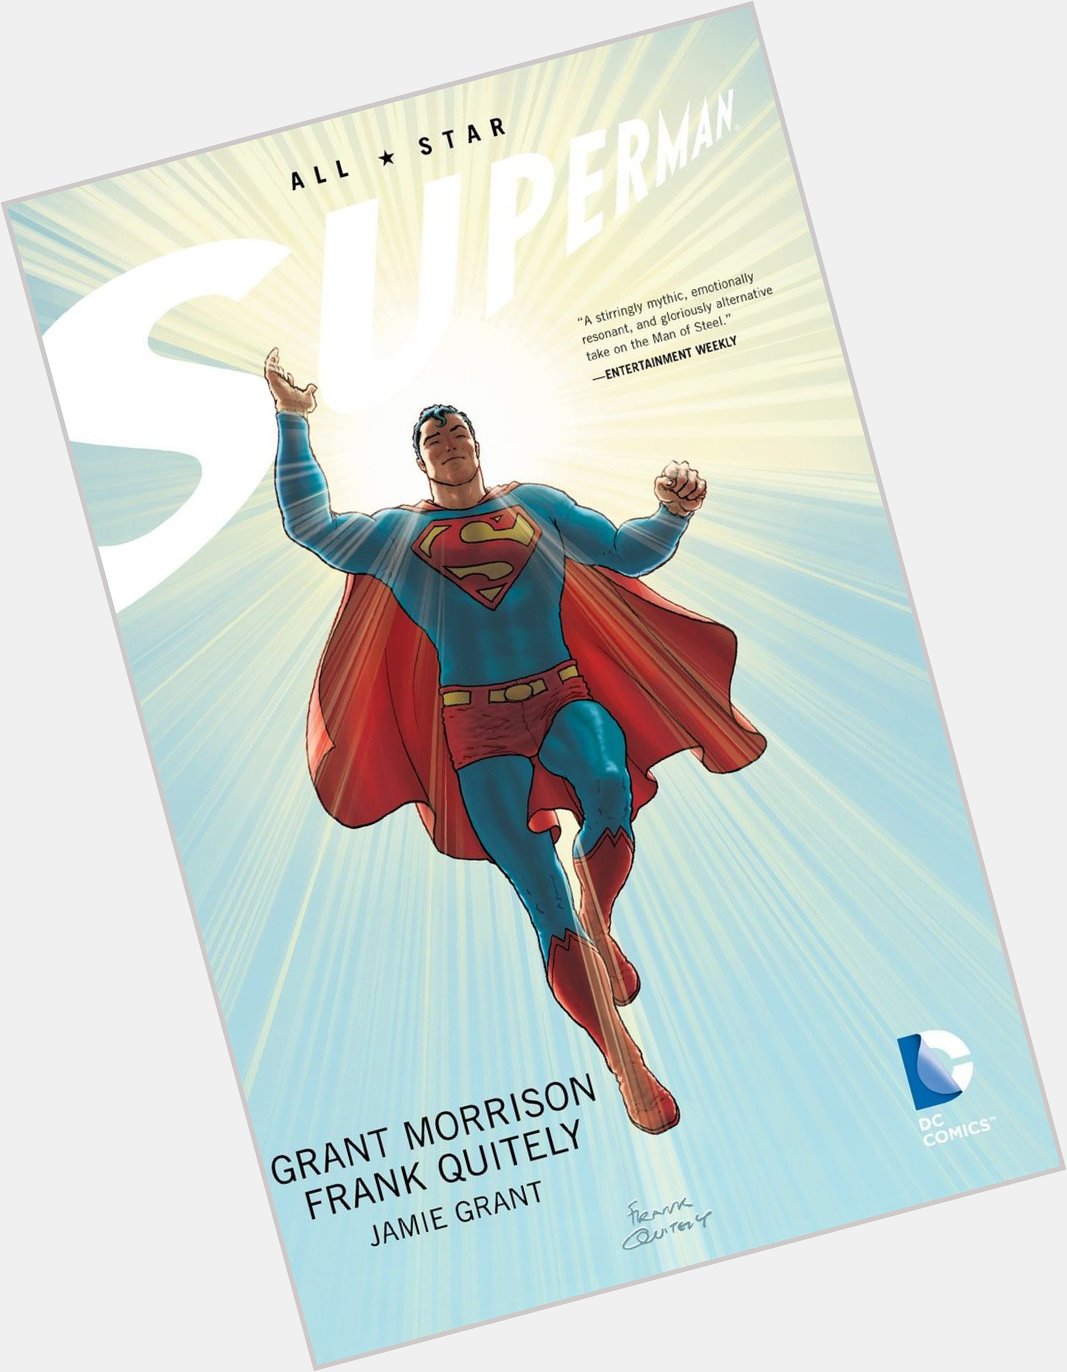 Happy birthday to my favorite Superman writer of all time (among many other things), Grant Morrison! 